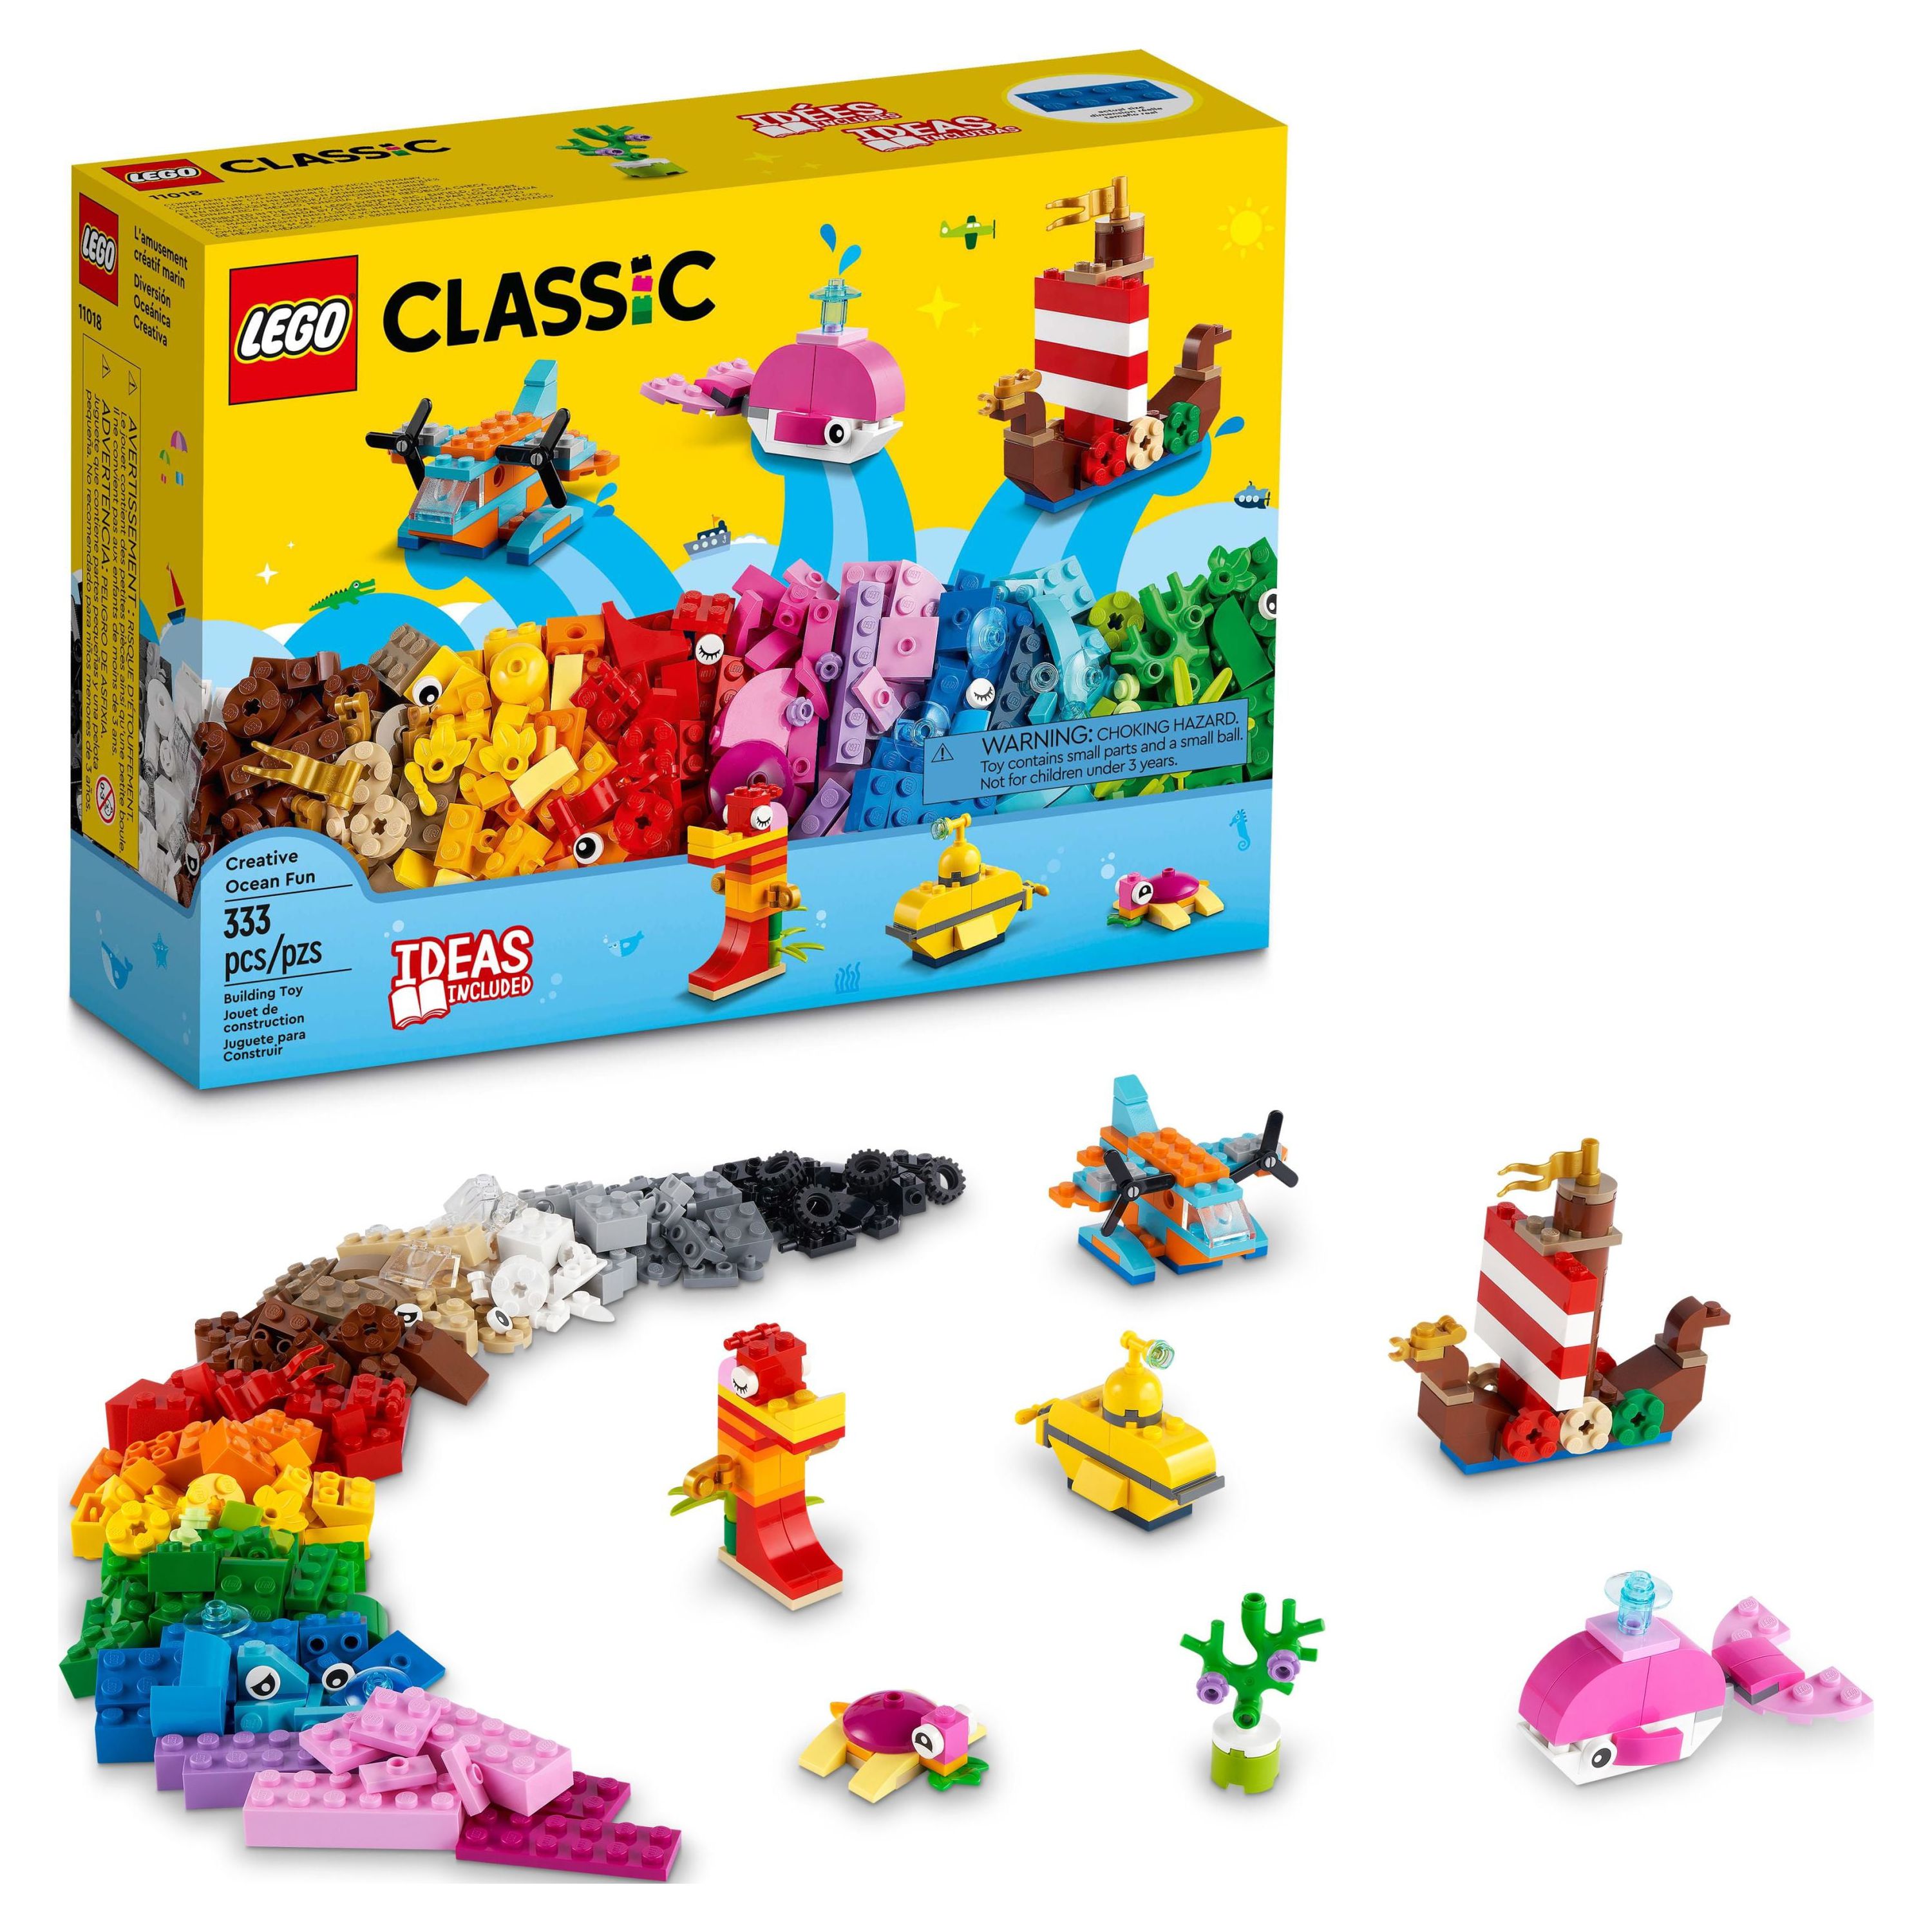 LEGO Classic Creative Ocean Fun 11018 Building Kit; With 6 Mini Builds, Including a Viking Ship and a Yellow Submarine, Plus Extra Bricks for Imaginative Play; Educational Toy for Ages 4+ (333 Pieces) - image 1 of 8